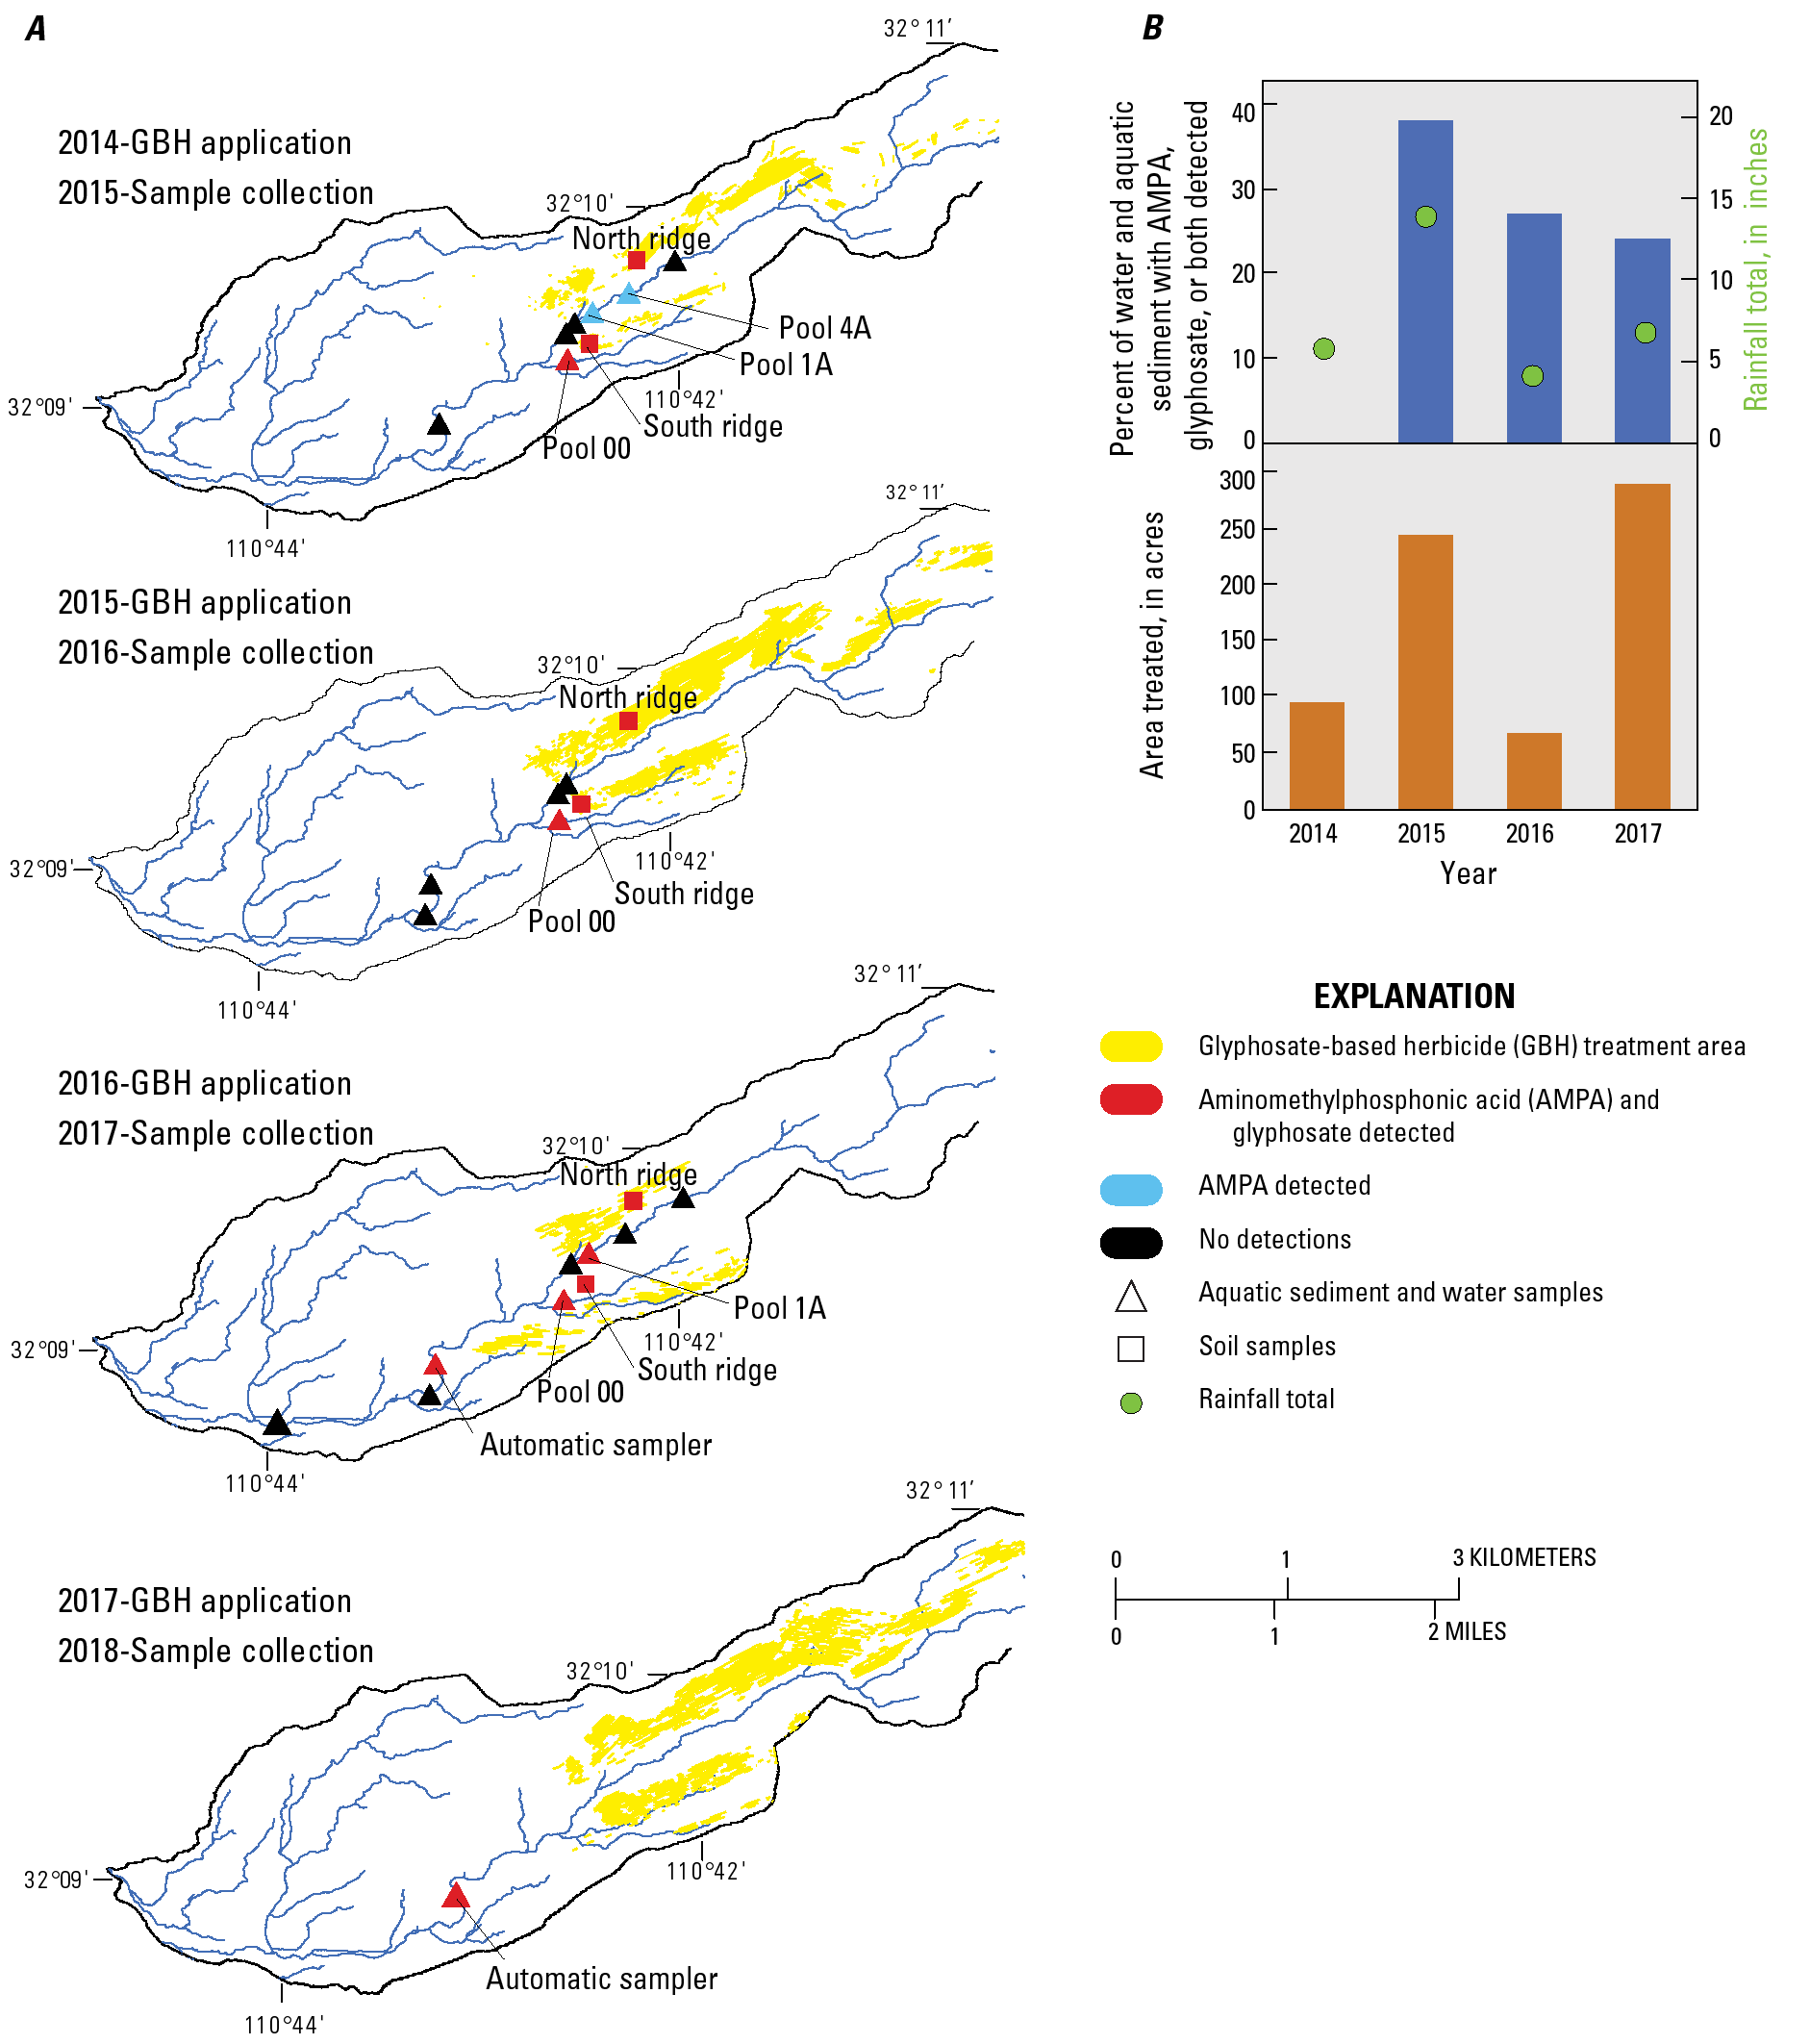 Maps of watershed with colored symbols for AMPA and glyphosate detections